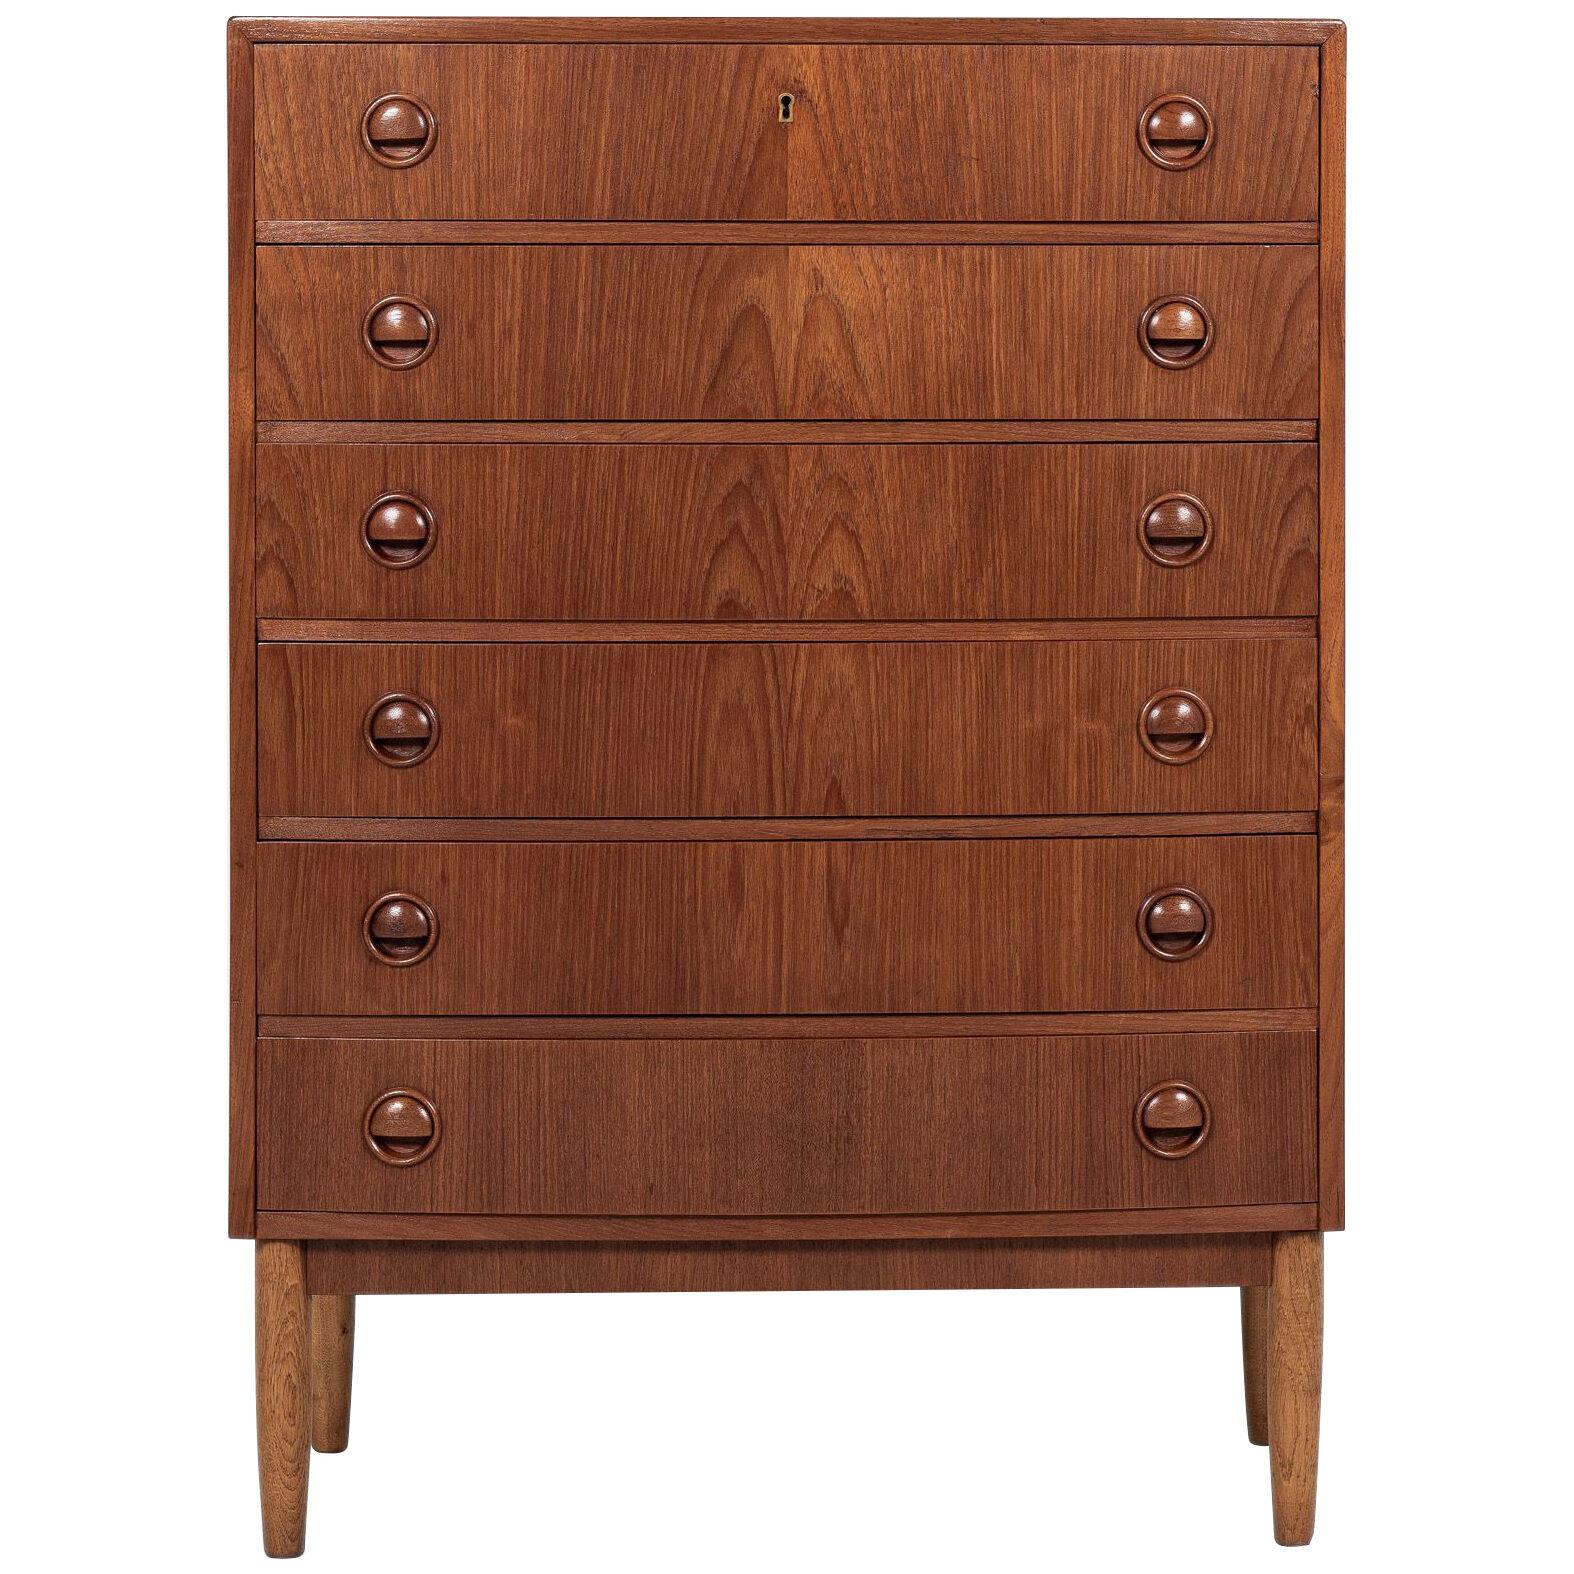 Midcentury Danish chest of 6 drawers in teak by Kai Kristiansen 1960s - curved